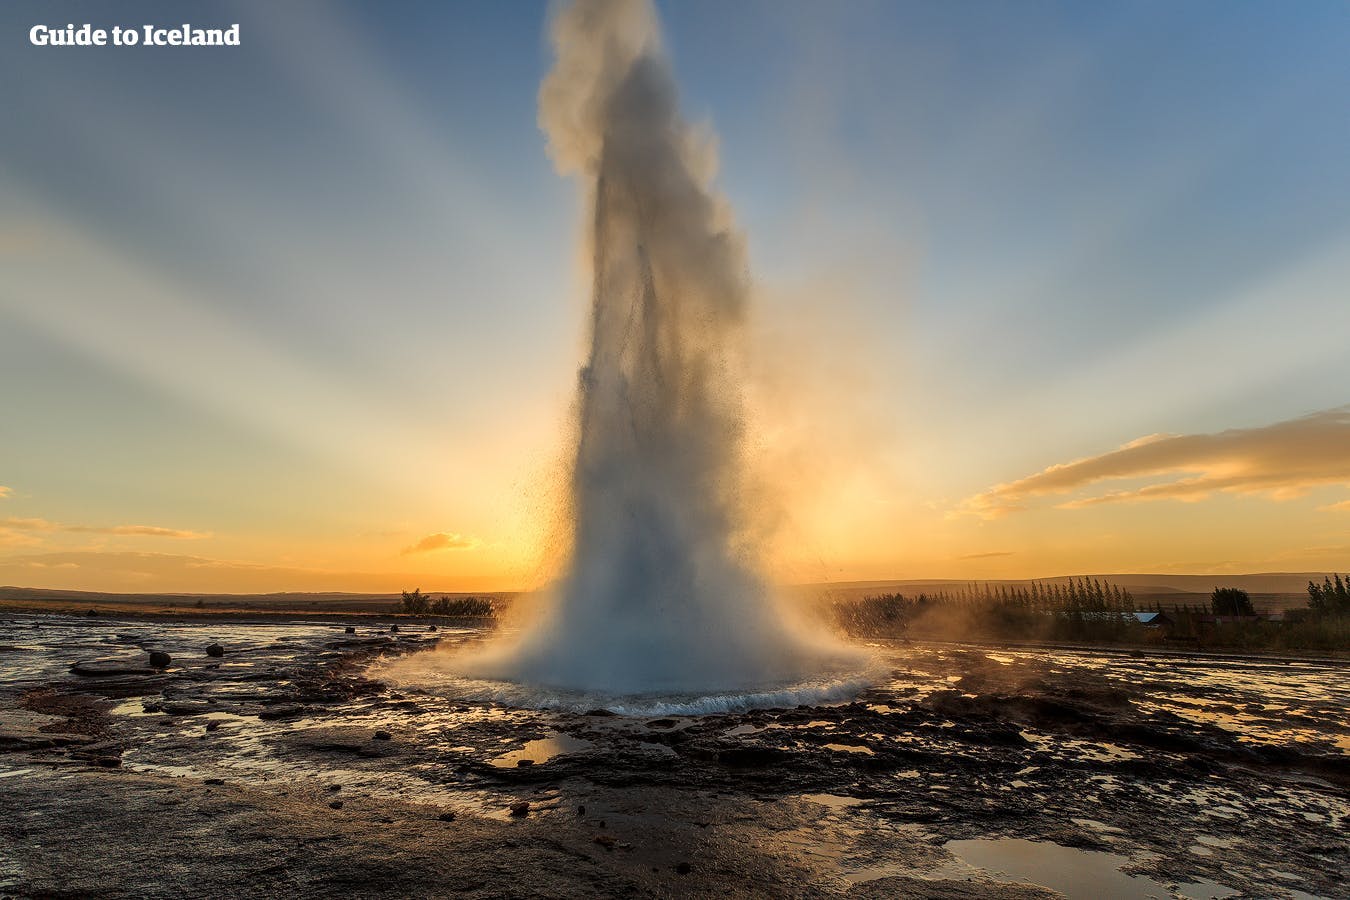 Strokkur, found in Haukadalur geothermal valley, is known to erupt every five to ten minutes.